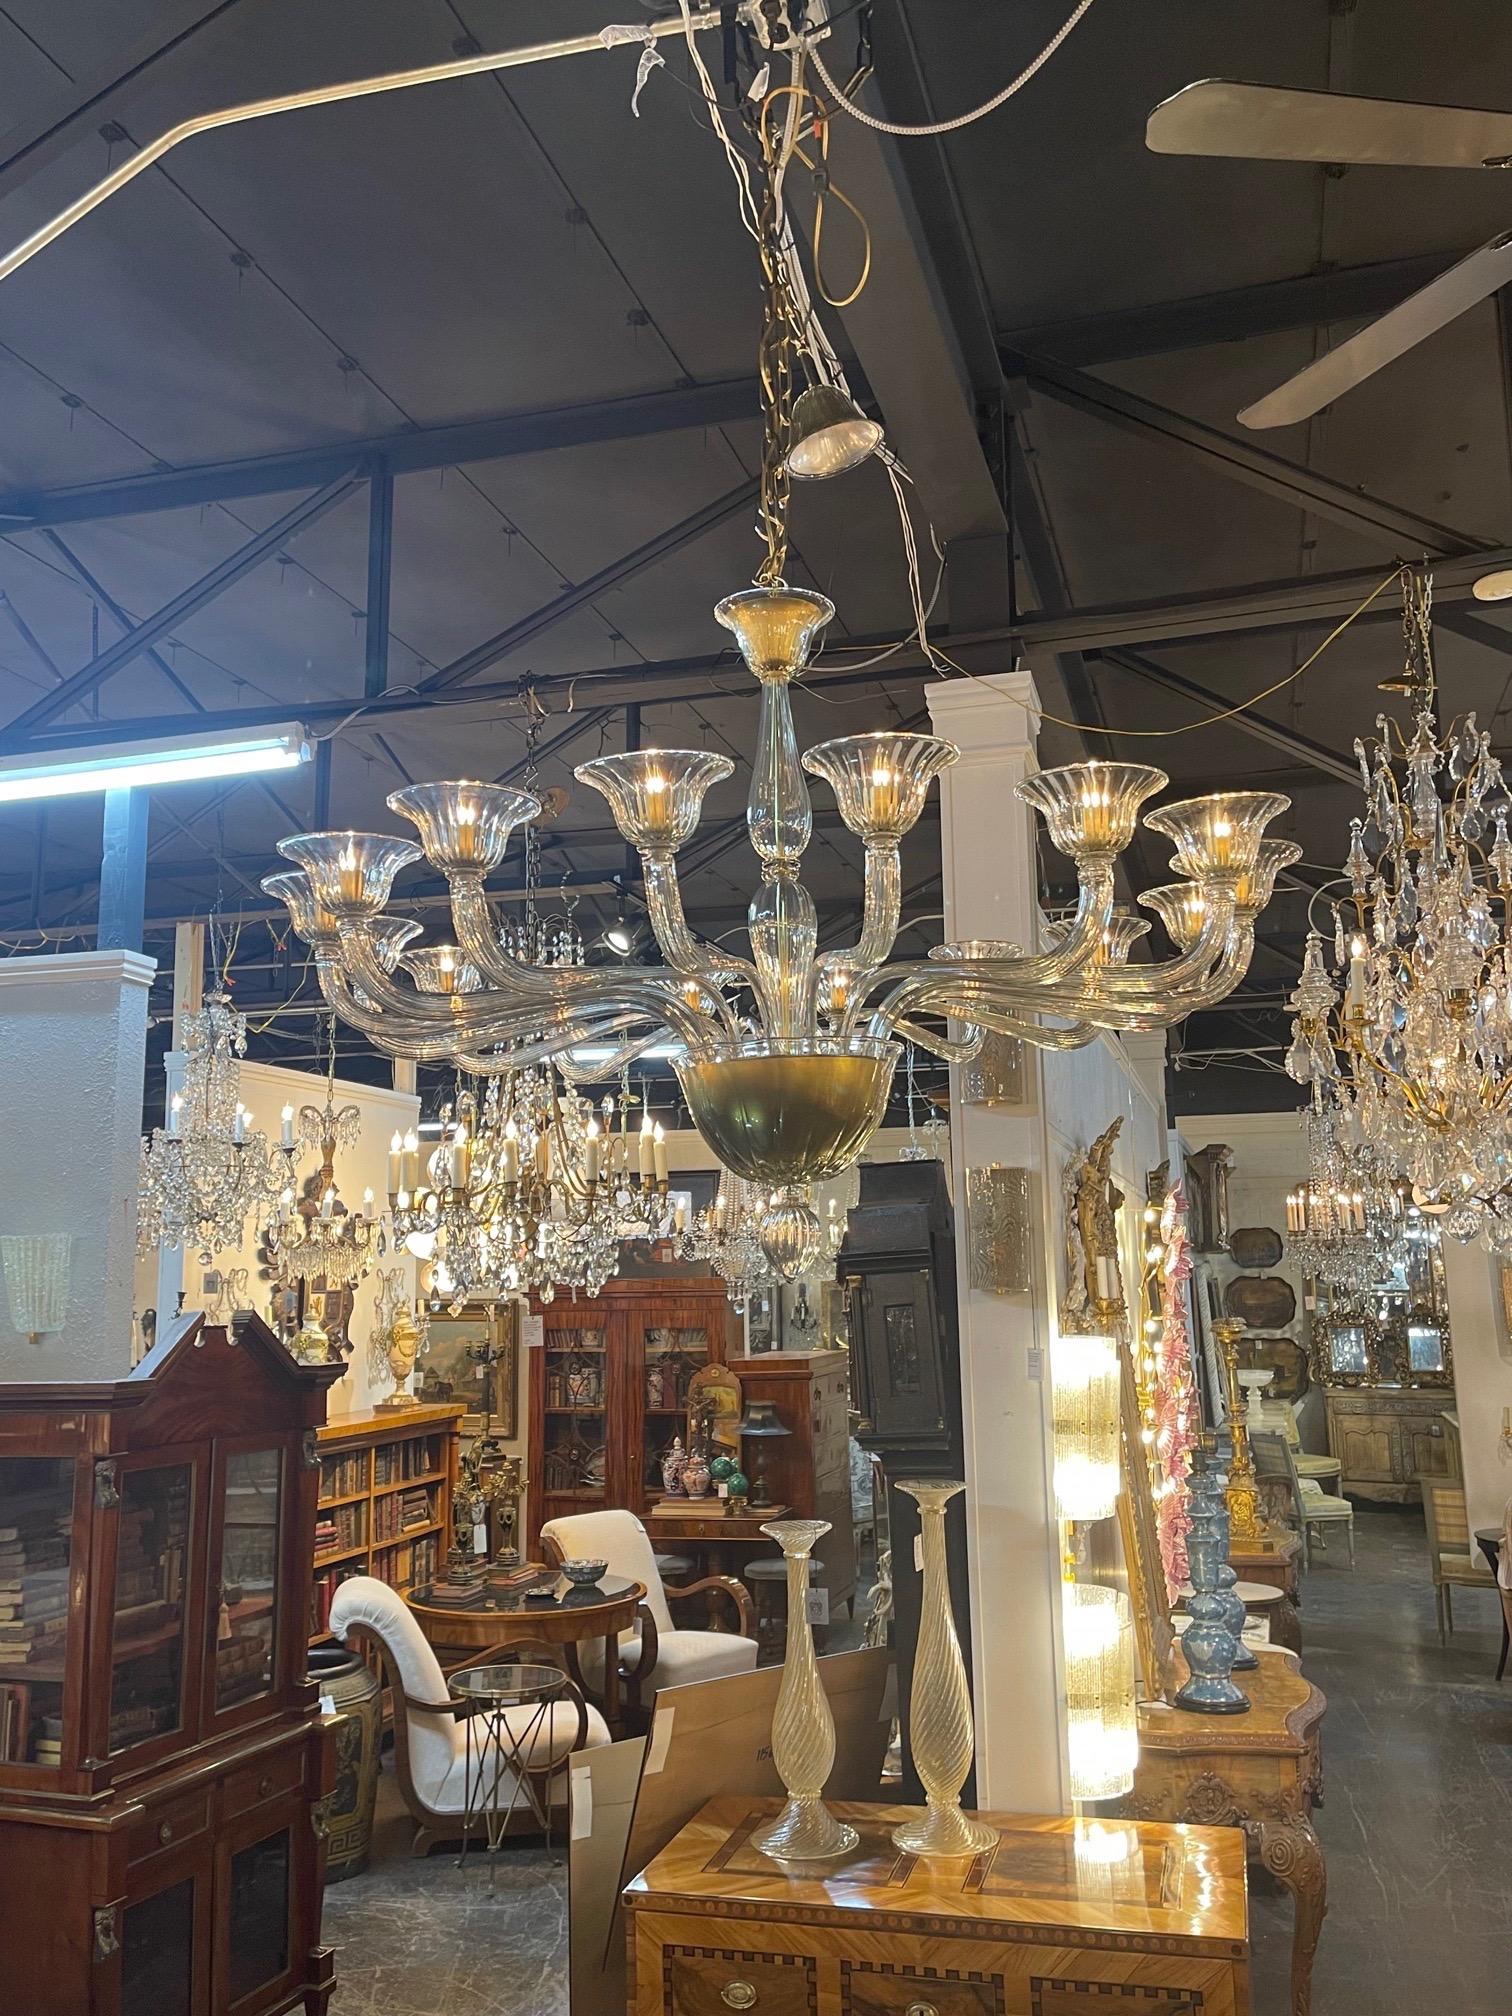 Spectacular large scale modern Murano glass chandelier with 16 lights. Pretty pale gold color with beautiful decorative arms. A true work of art that is sure to impress!!